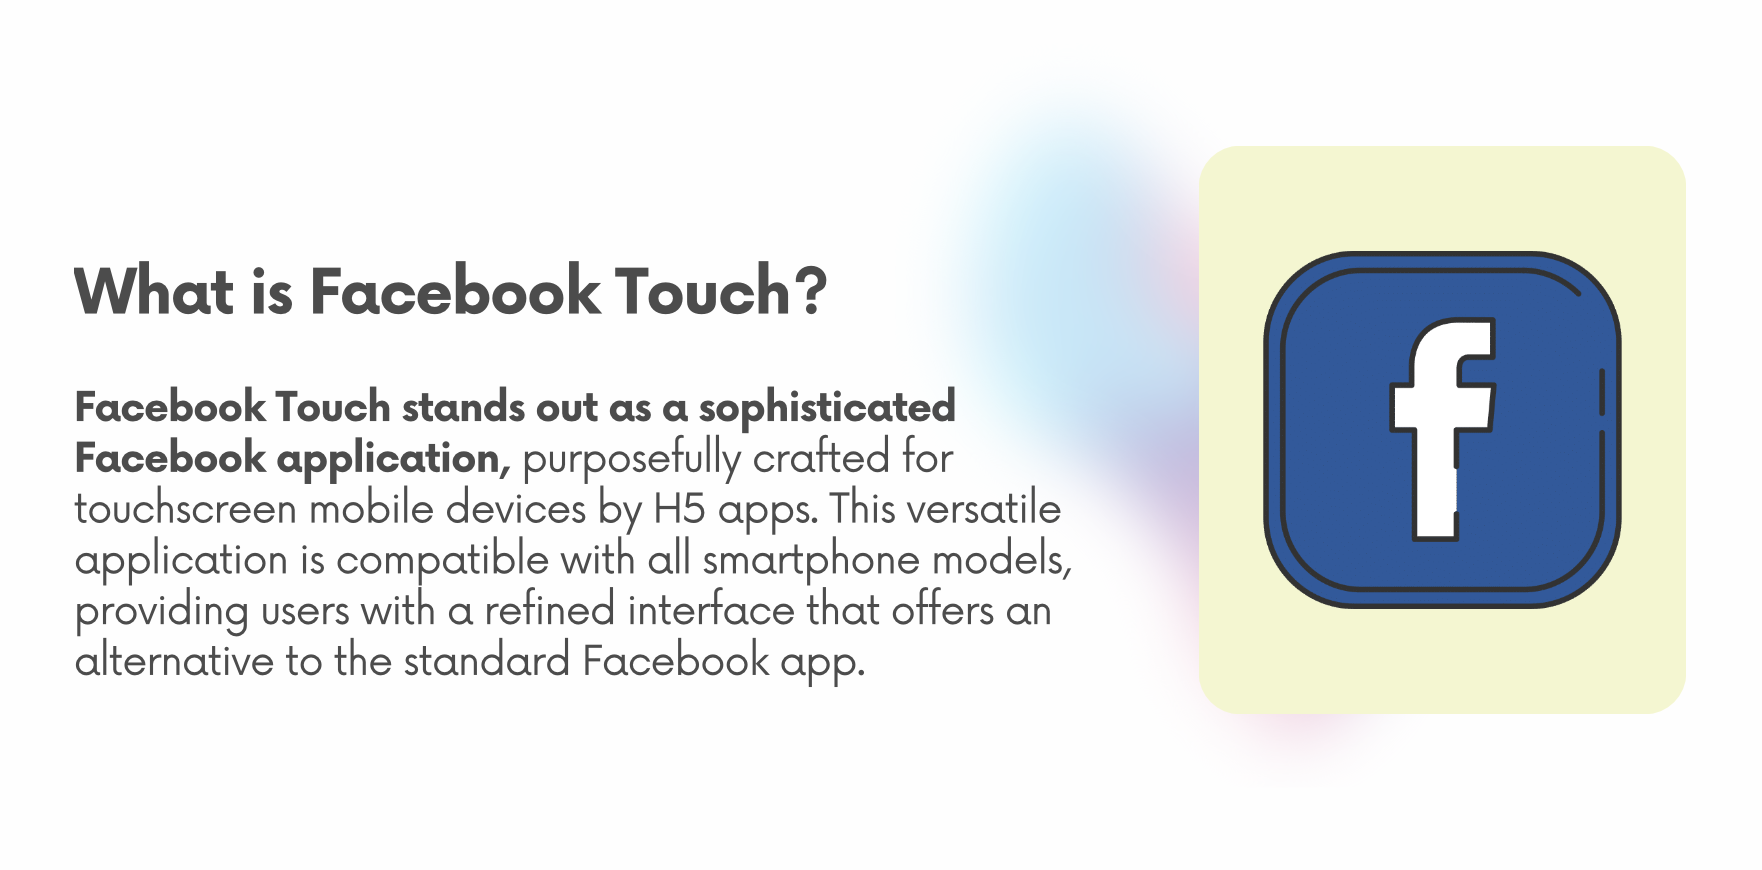 Explanation of Touch on Facebook - What is Facebook Touch?